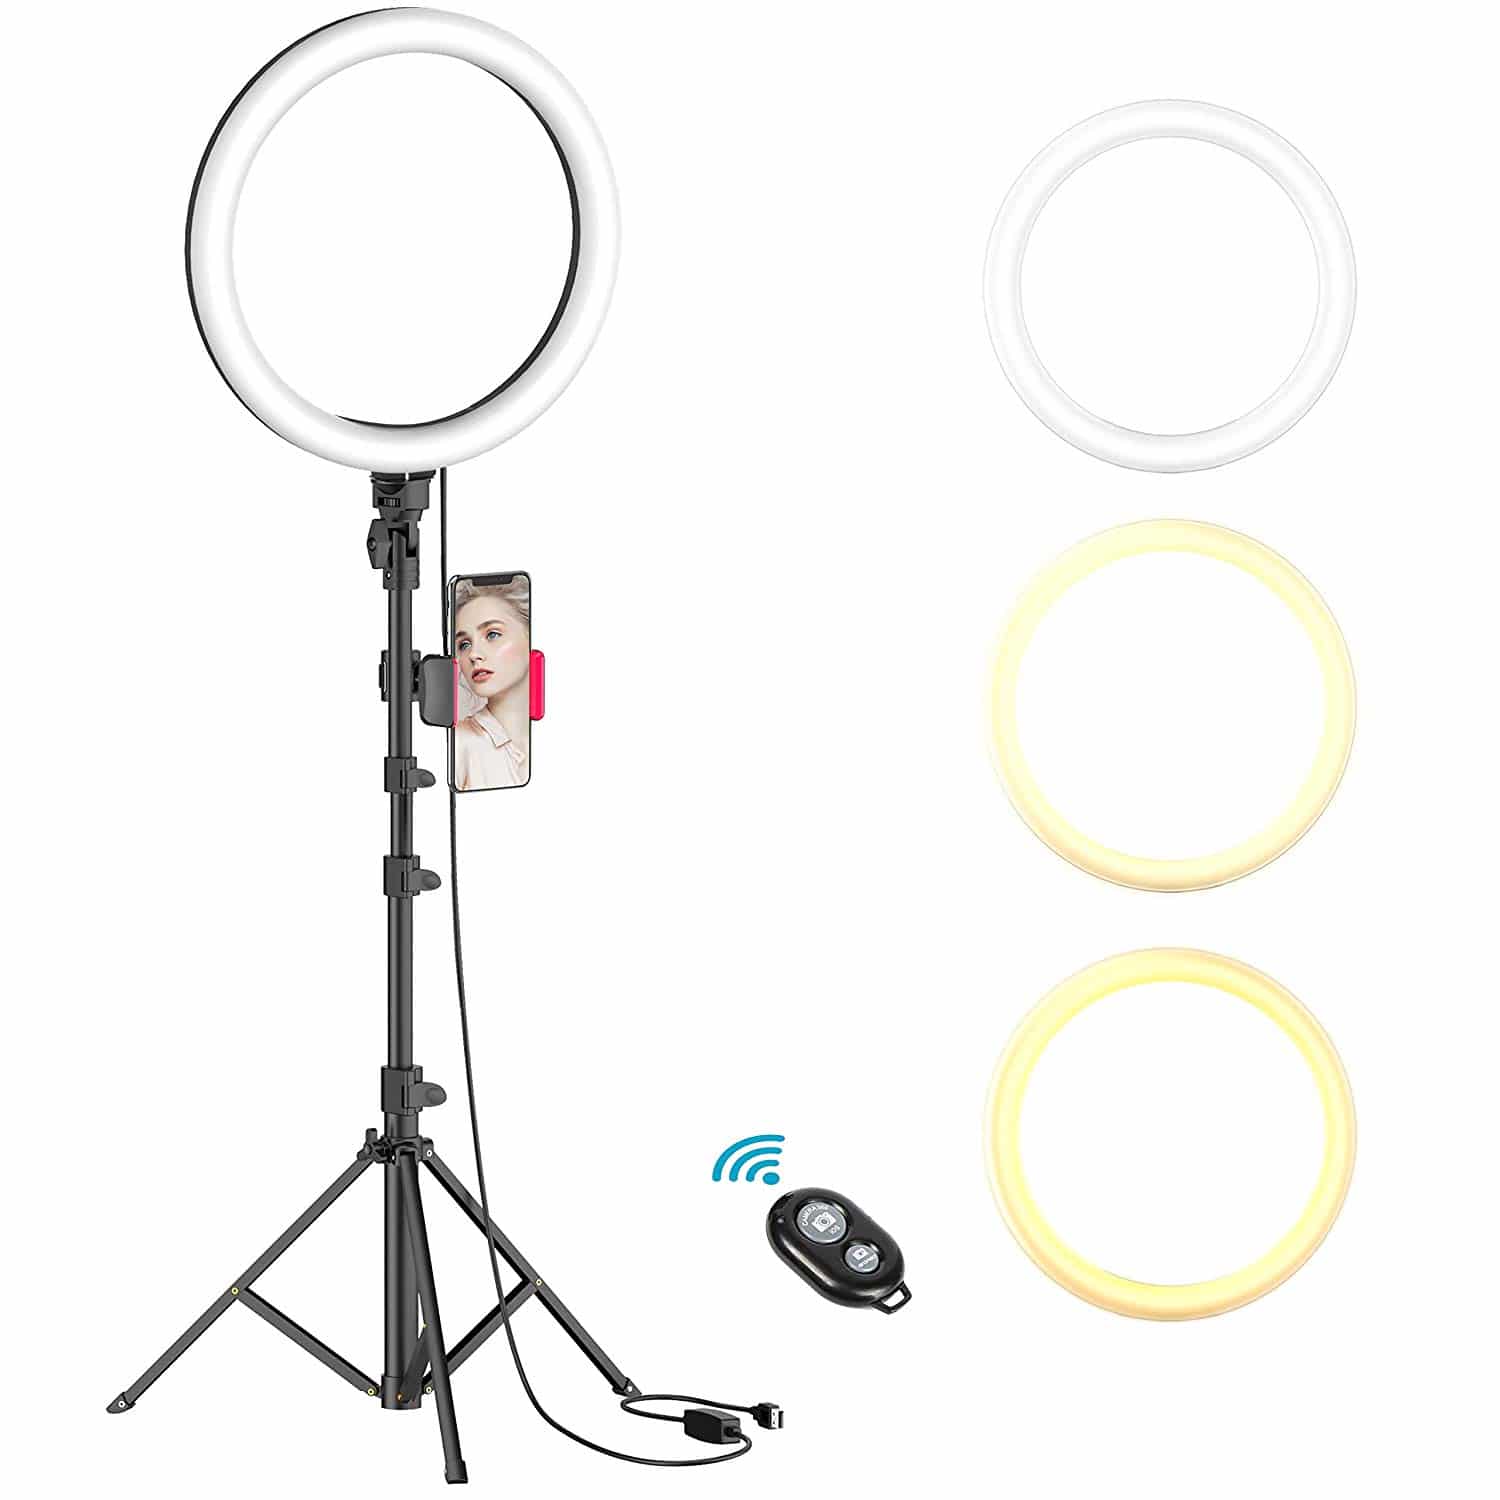 iMartine 10 LED Ring Light with Microphone,Tripod Stand and Phone Holder for Makeup Dimmable Desktop Selfie Light Ring for YouTube Video Recording,Live Streaming,TikTok,Photography